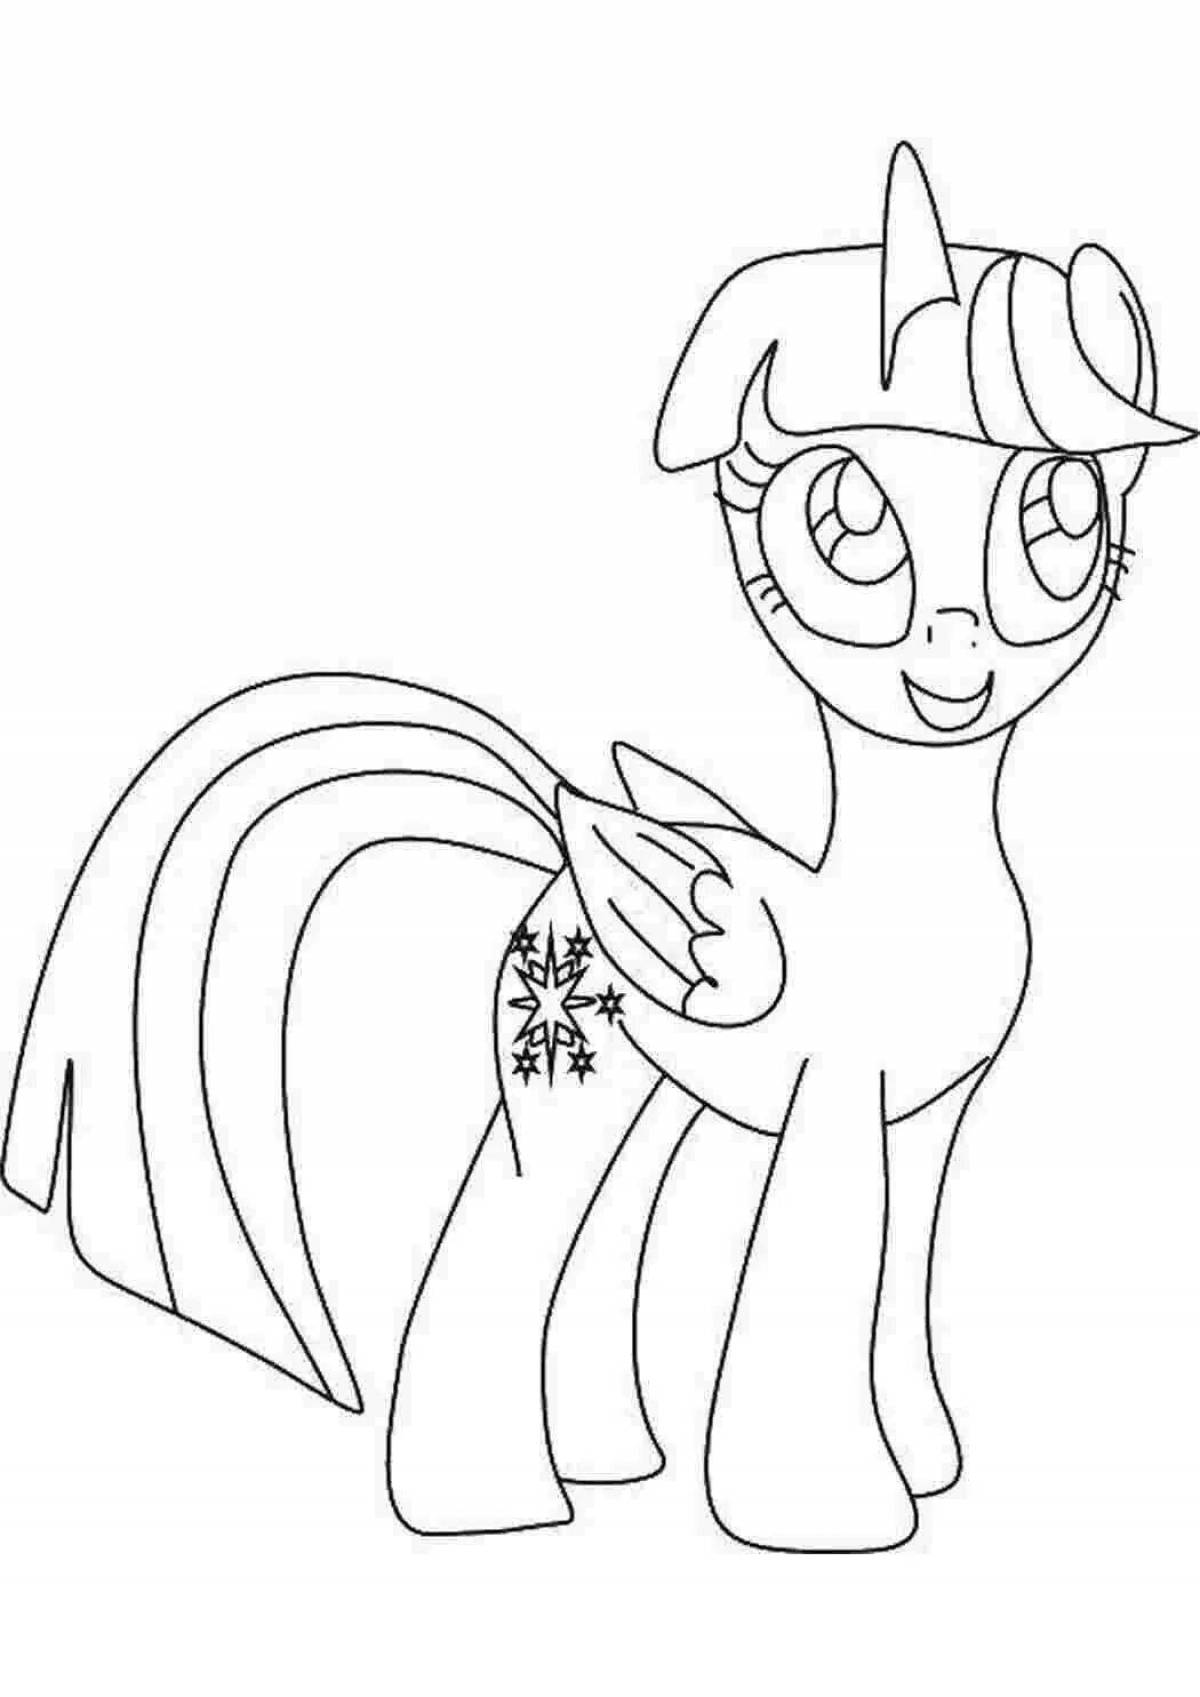 Glowing Twilight Sparkle Coloring Page